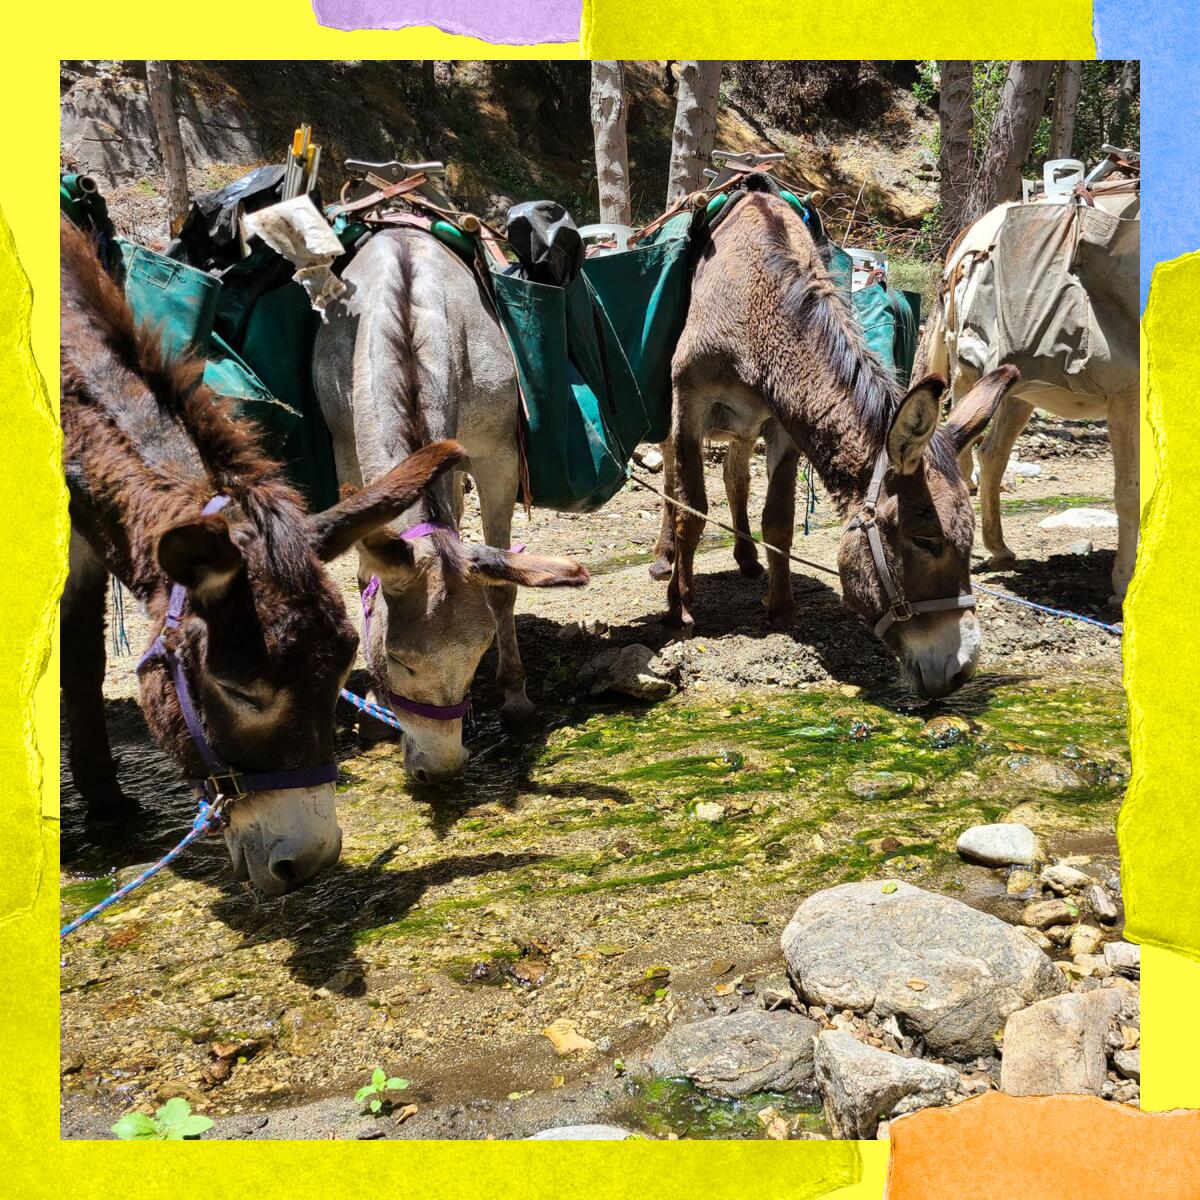 Burros carrying gear on their backs at a stream.